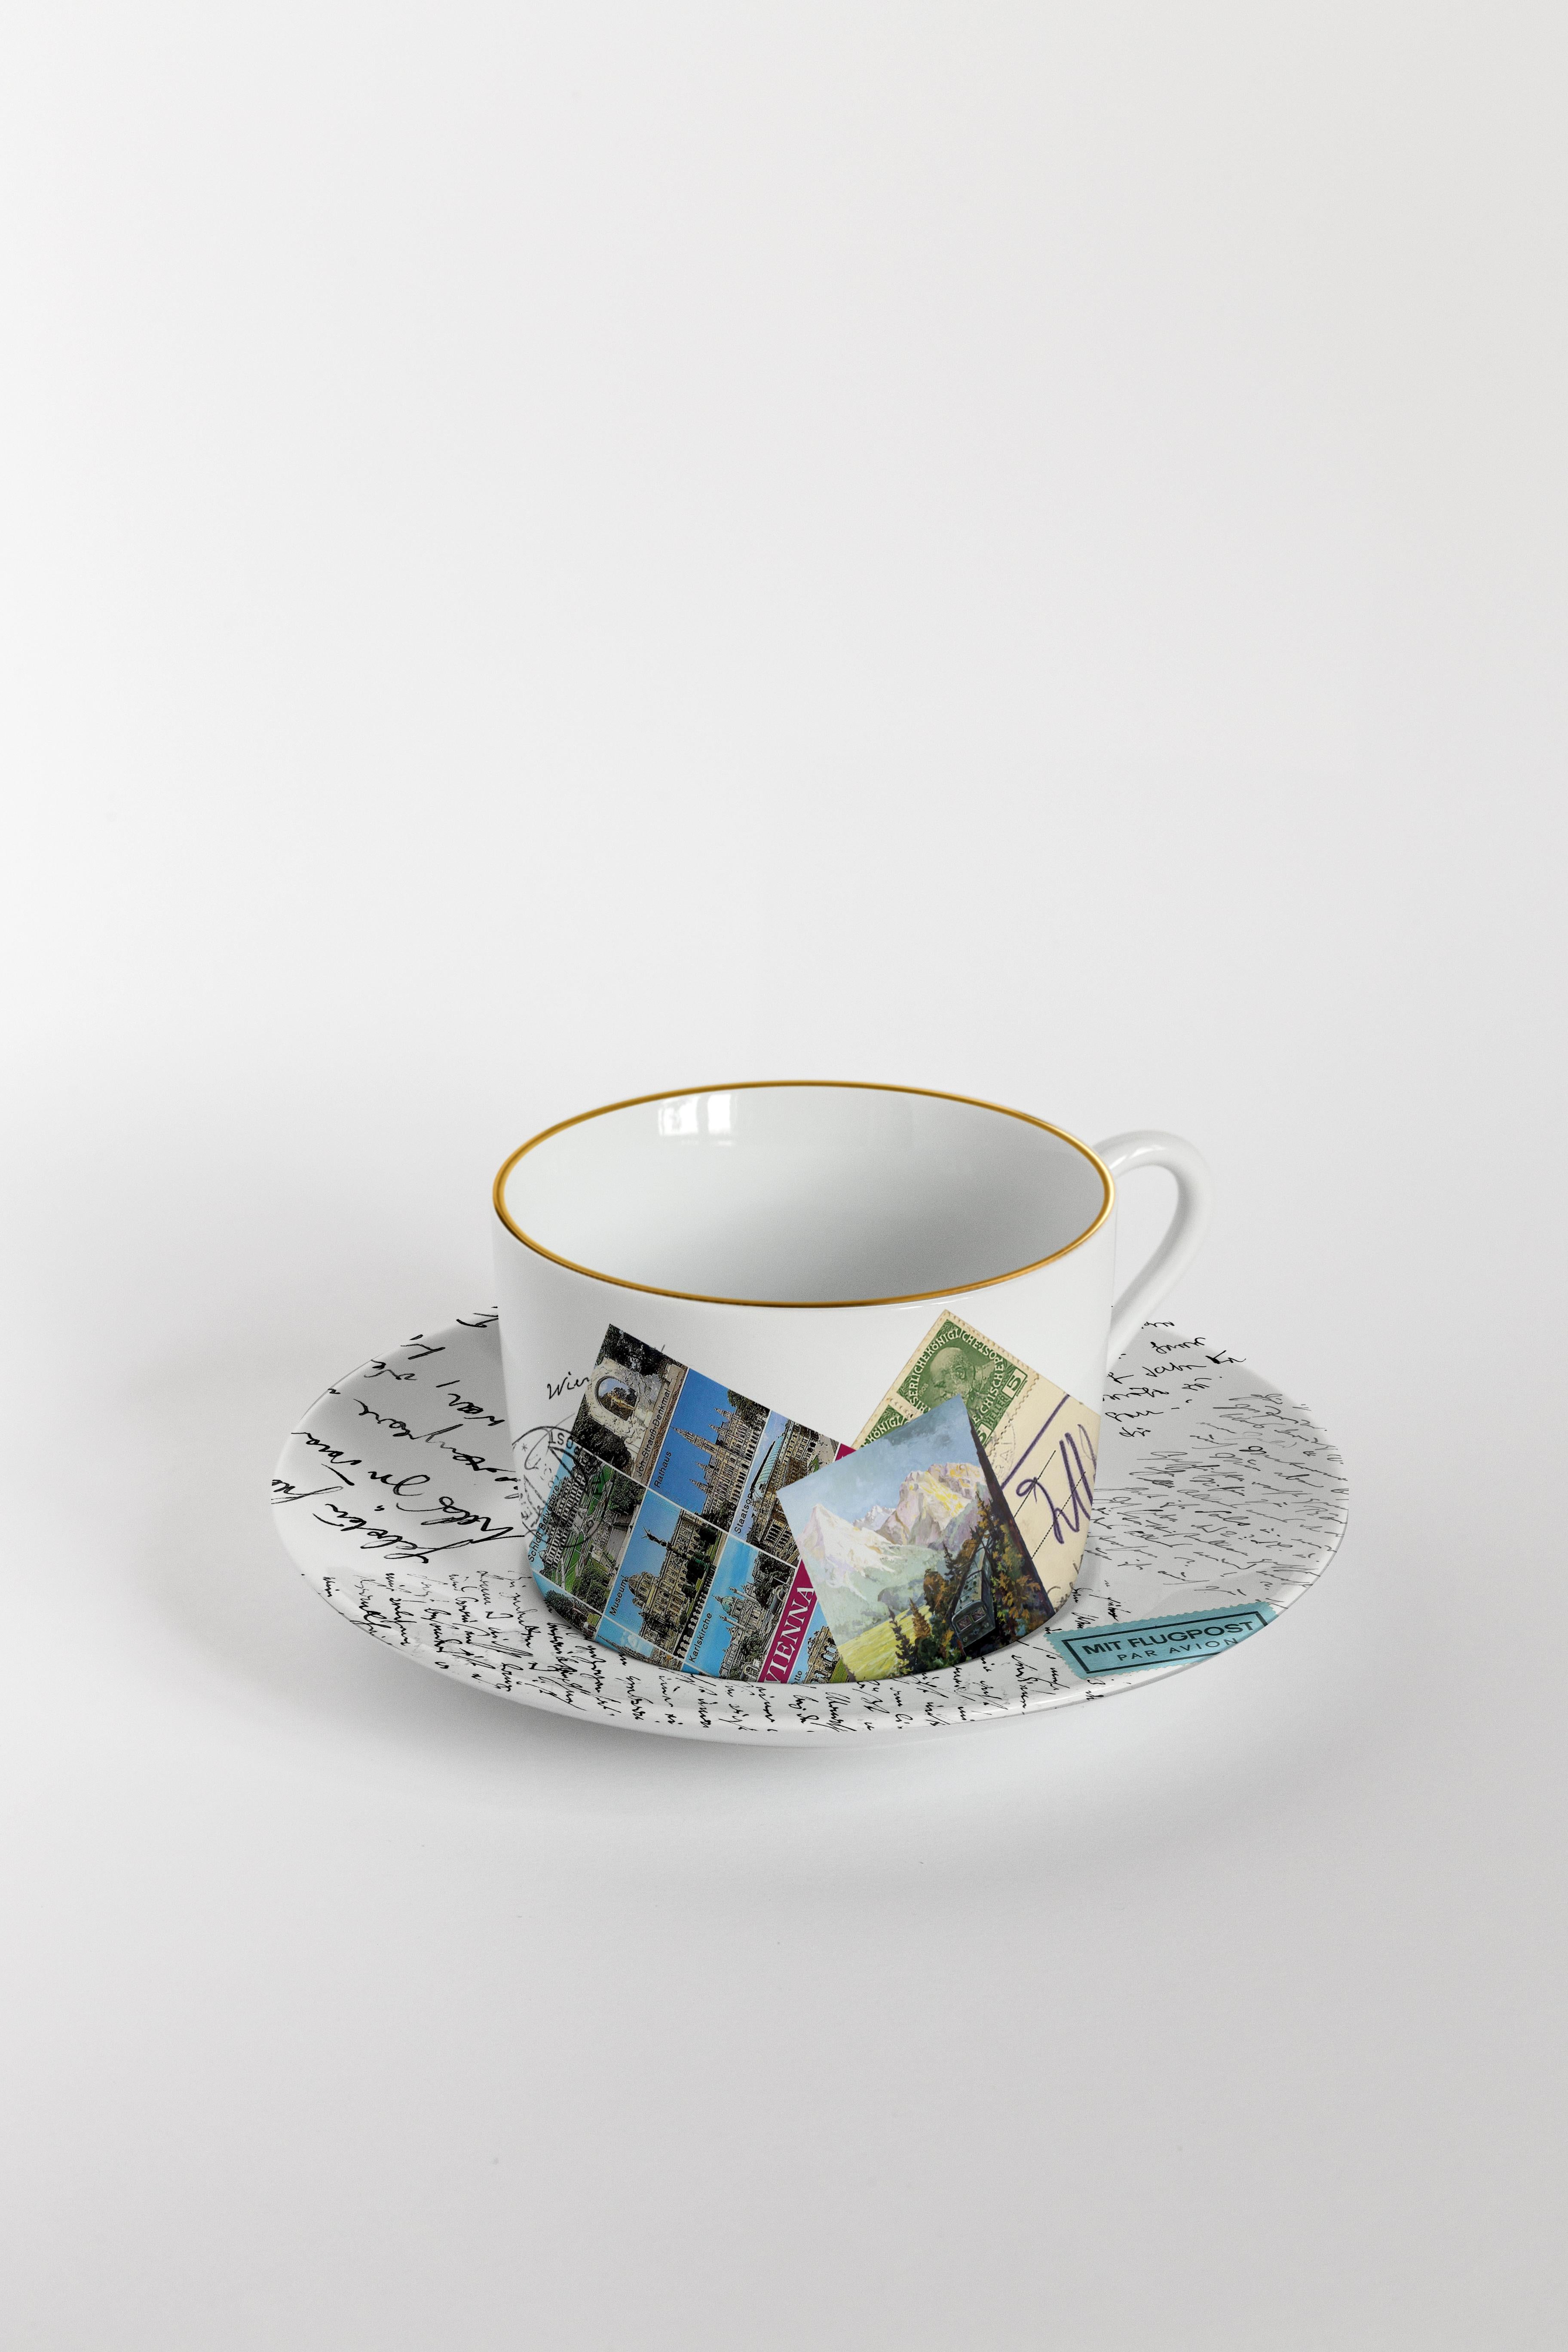 Corrispondenze, Six Contemporary Decorated Tea Cups with Plates In New Condition For Sale In Milano, Lombardia